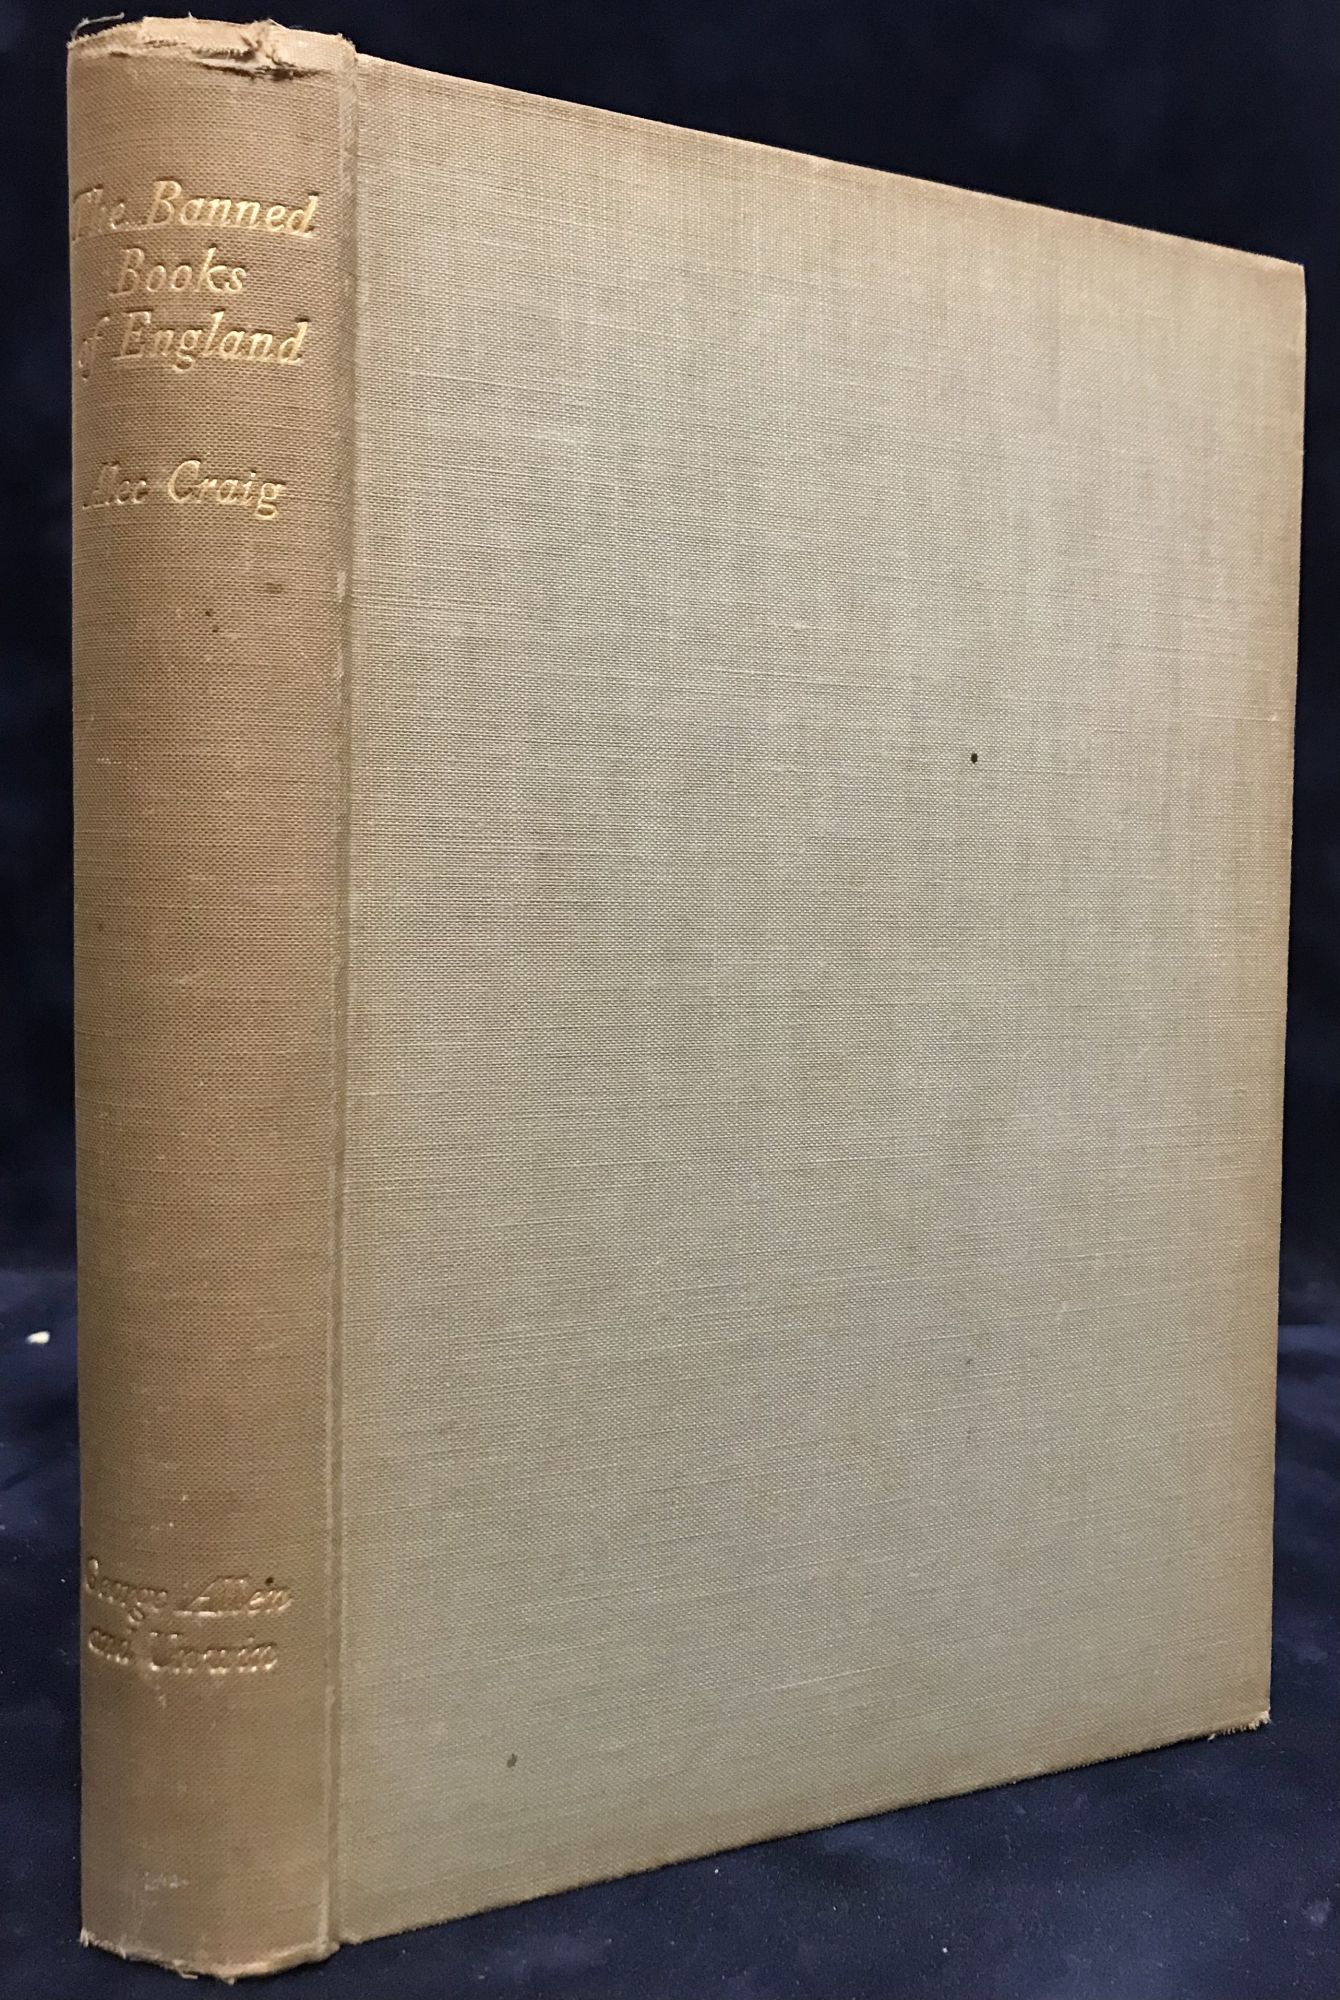 The Banned Books Of England By Craig Alec Forster E M Foreword Good Hardcover 1937